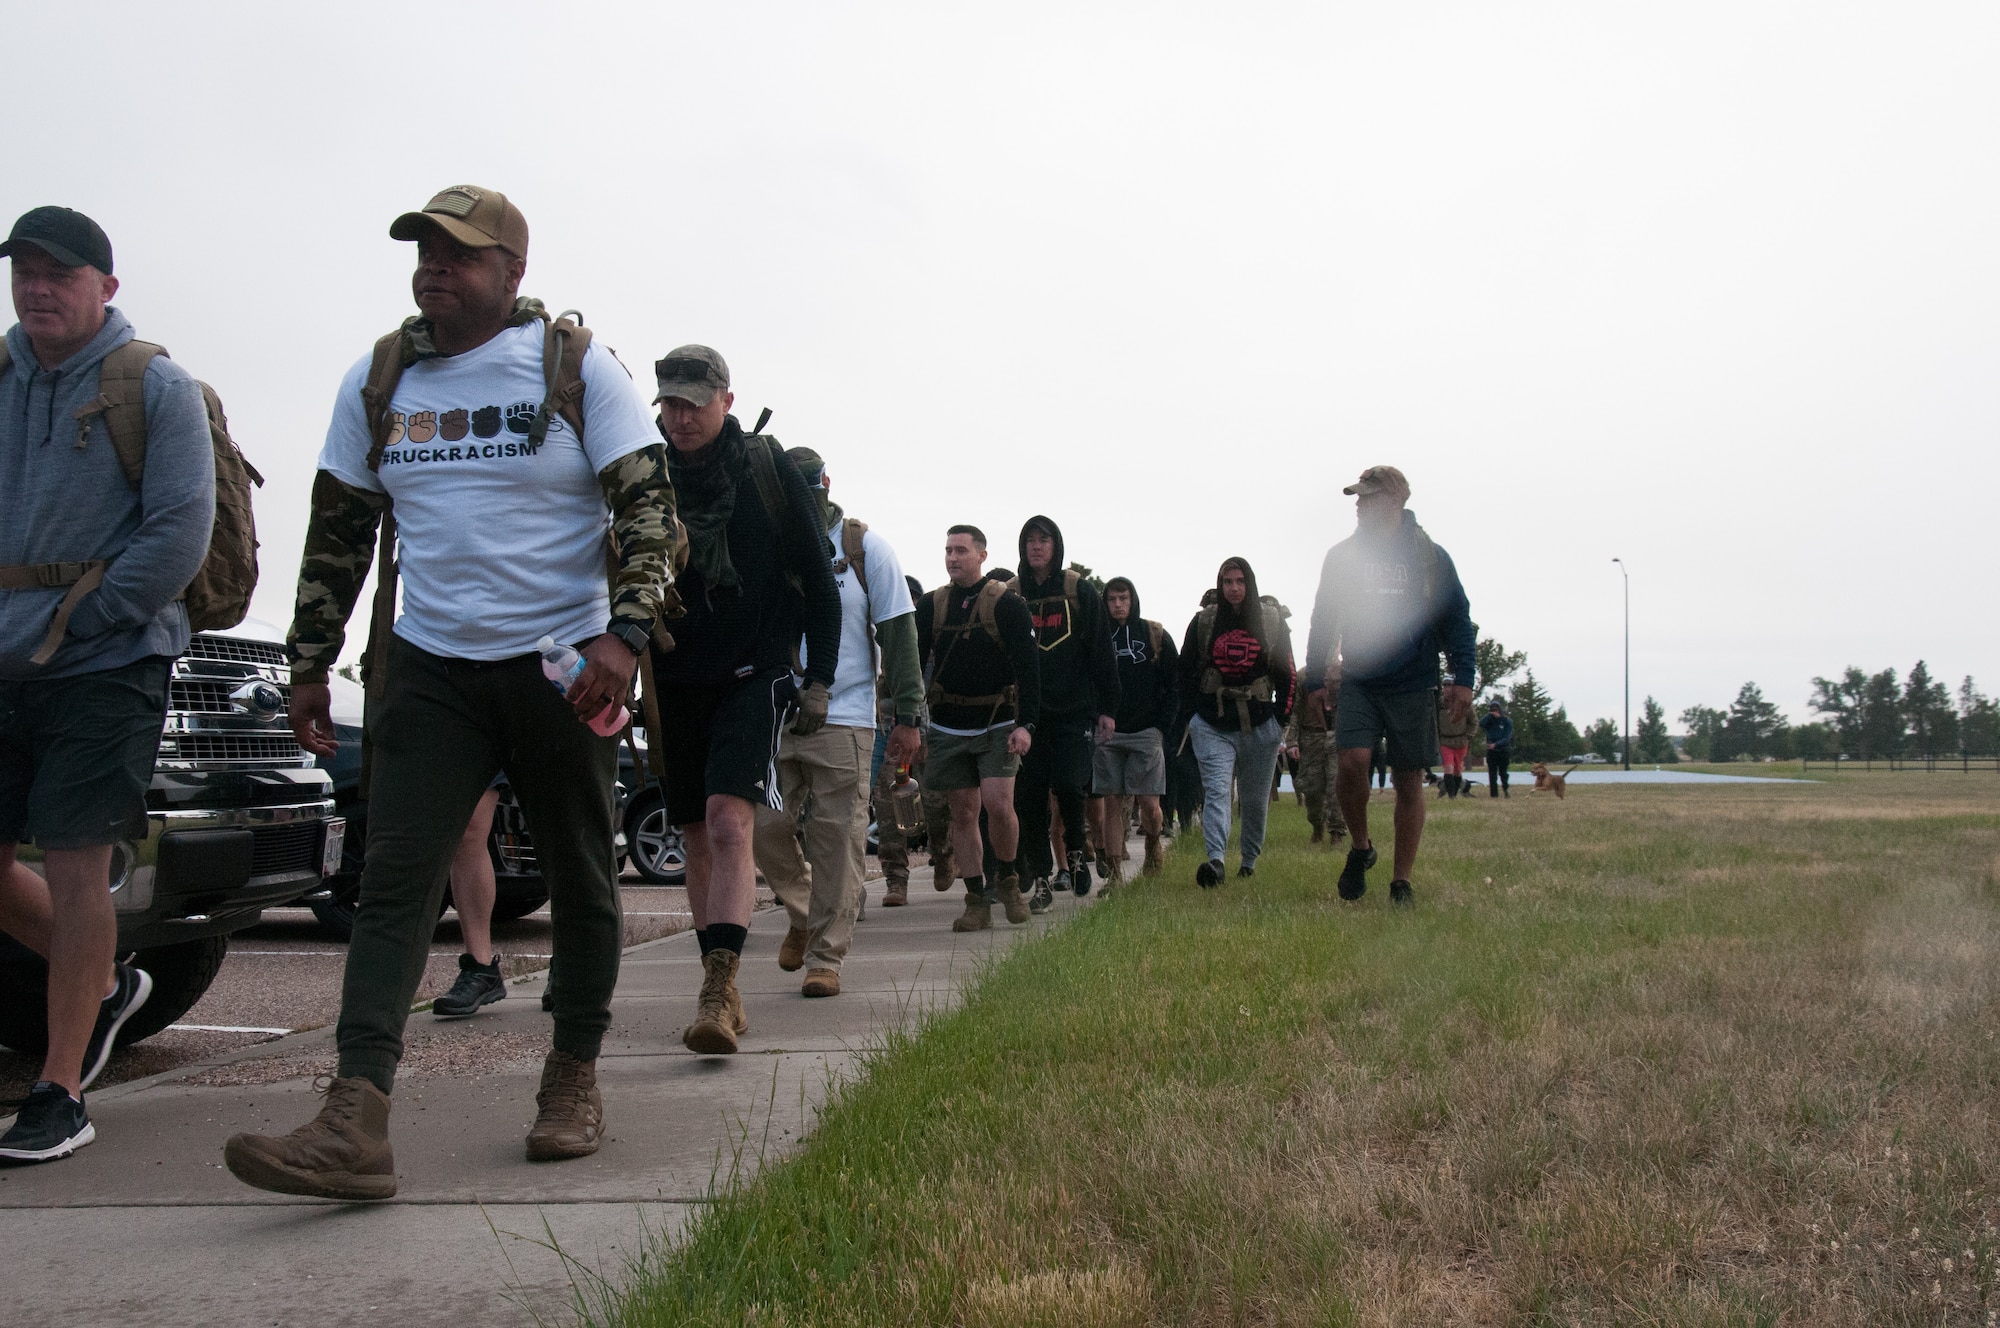 The ruck march was an event organized by 20th Air Force headquarters staff to build comradery and create a space for difficult conversations about racism and discrimination. U.S. Air Force photo by 1st Lt Ieva Bytautaite.